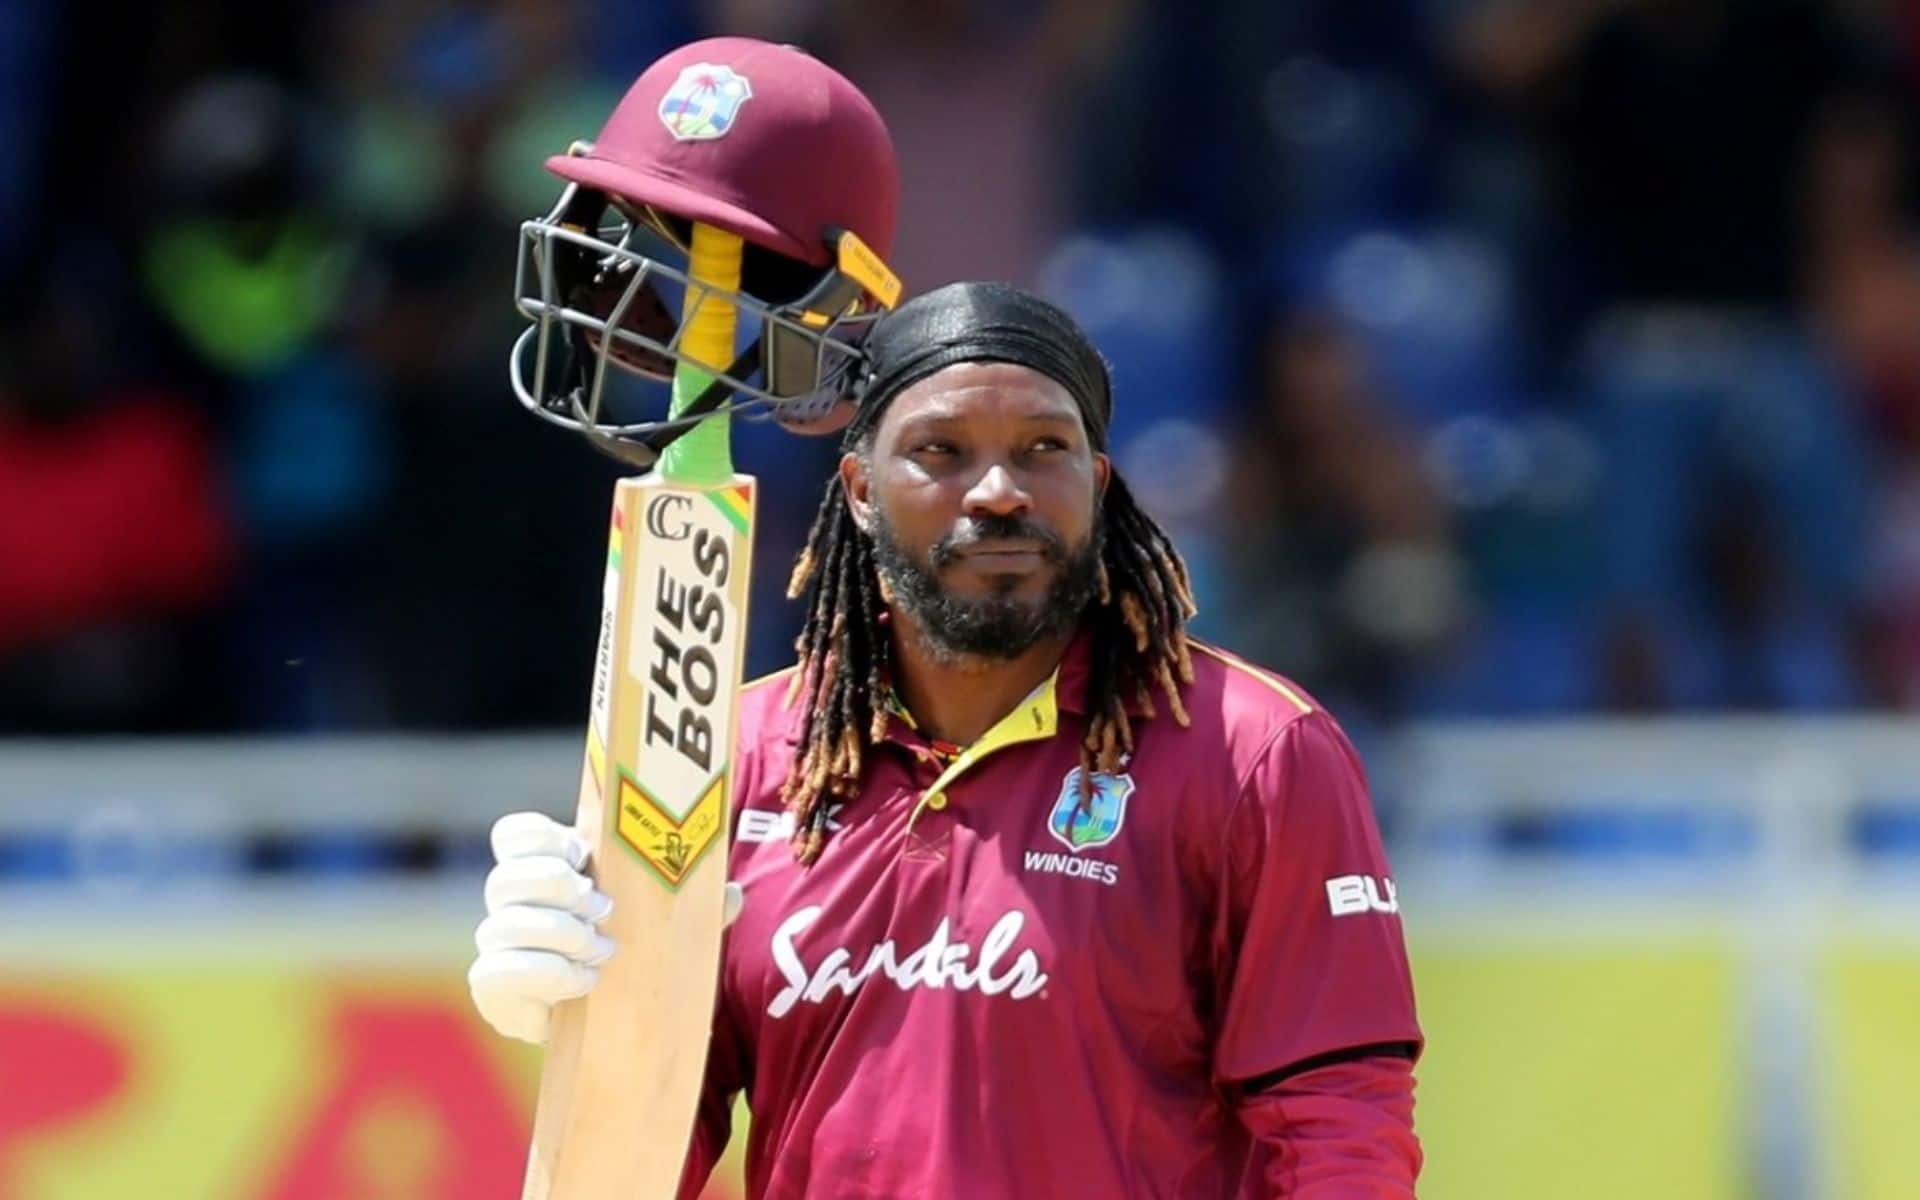 3. Chris Gayle has scored a total of 965 runs in 33 matches [X.com]